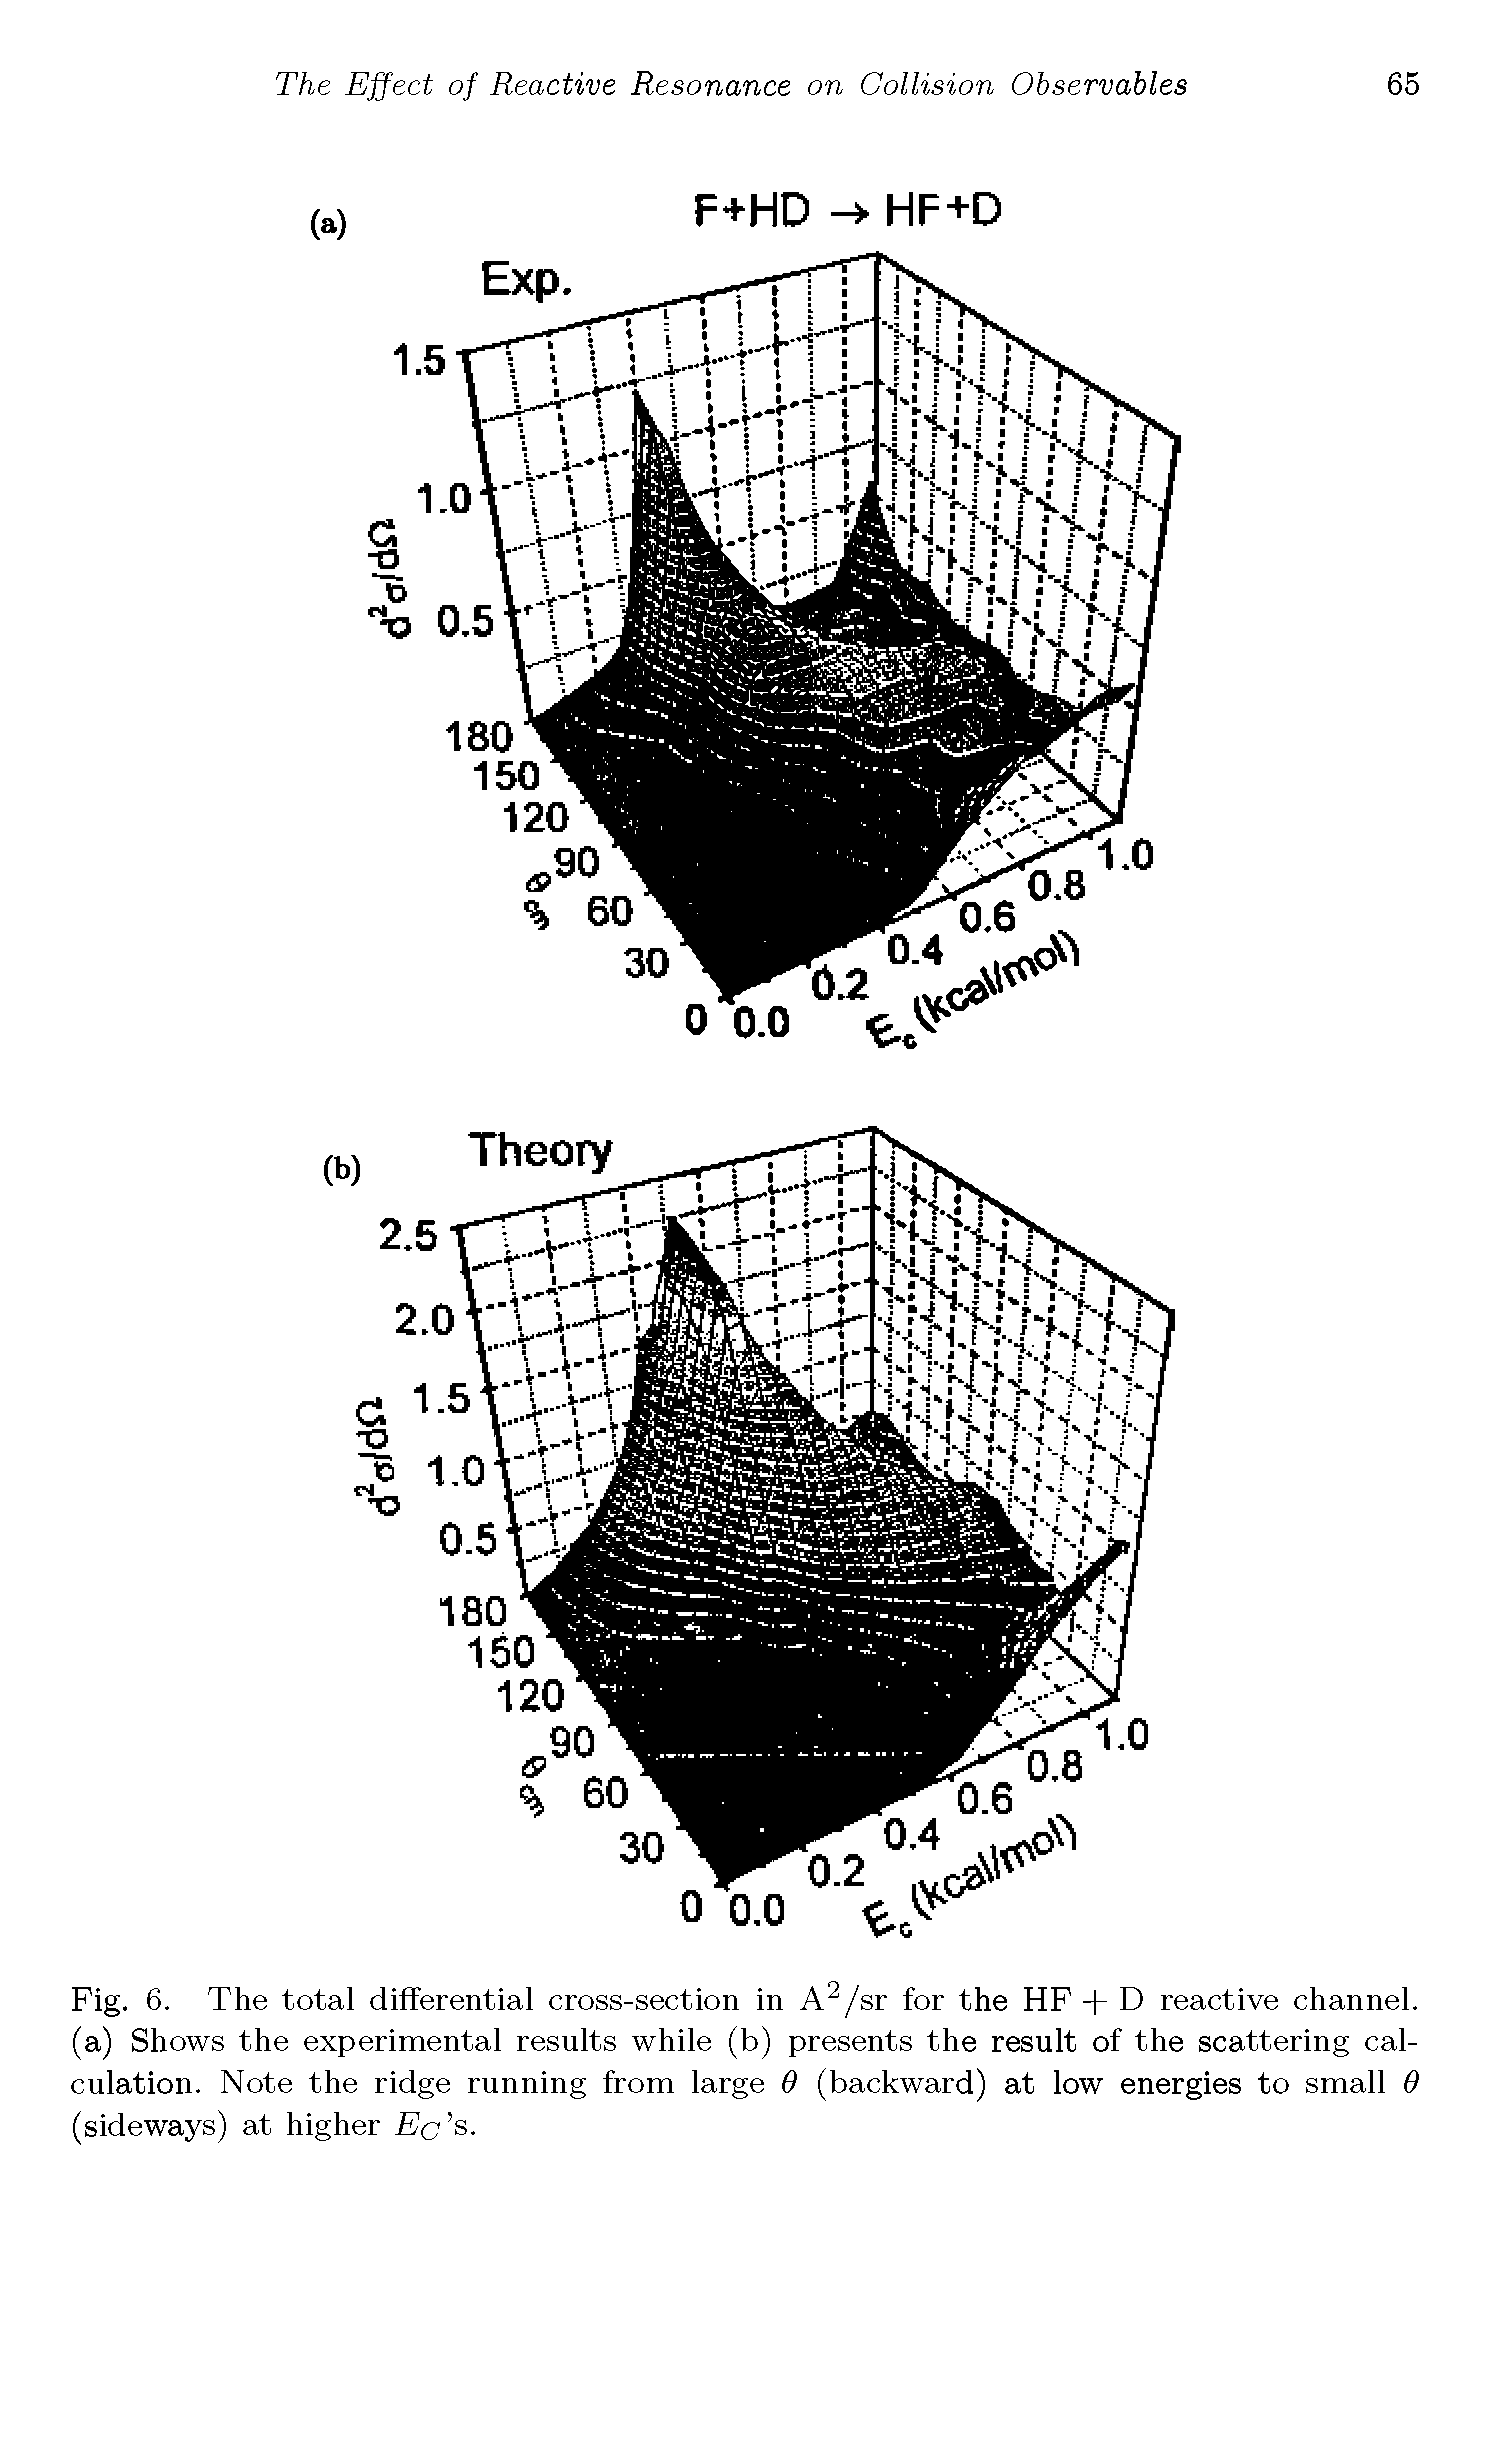 Fig. 6. The total differential cross-section in A2/sr for the HF D reactive channel, (a) Shows the experimental results while (b) presents the result of the scattering calculation. Note the ridge running from large 0 (backward) at low energies to small 0 (sideways) at higher Ec s.